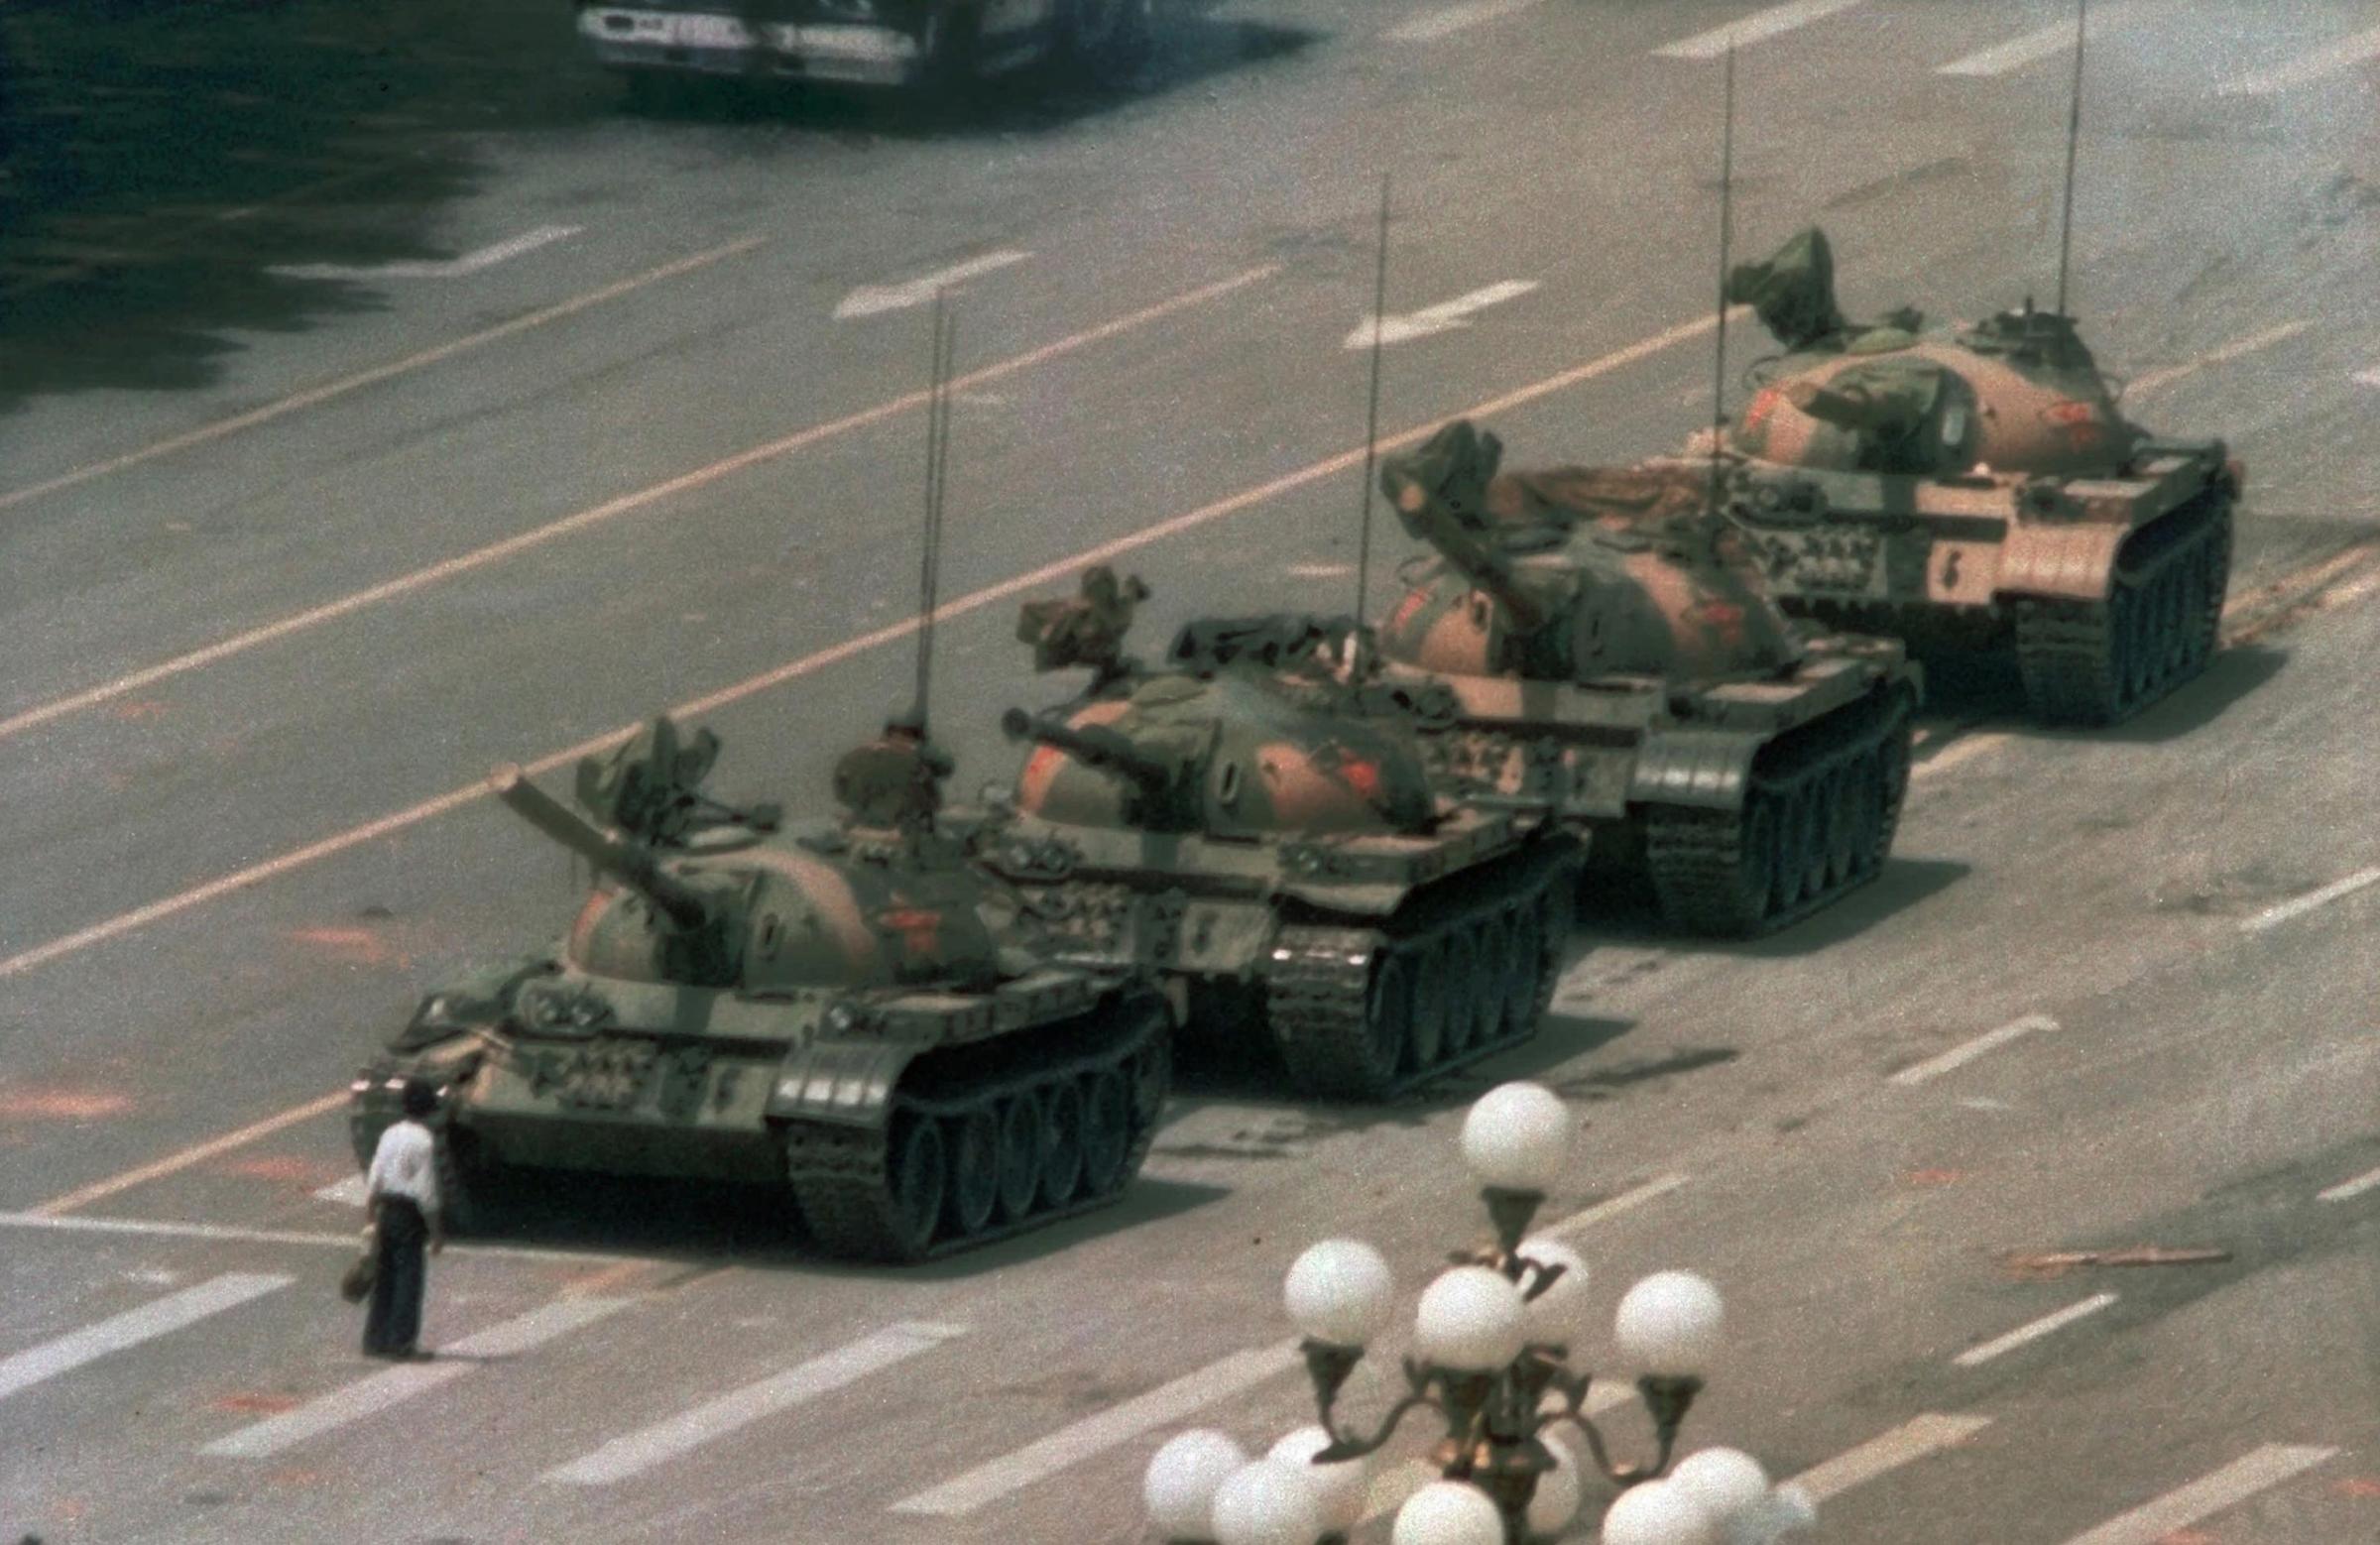 A Chinese man stands alone to block a line of tanks heading east on Beijing's Cangan Blvd. in Tiananmen Square on June 5, 1989.